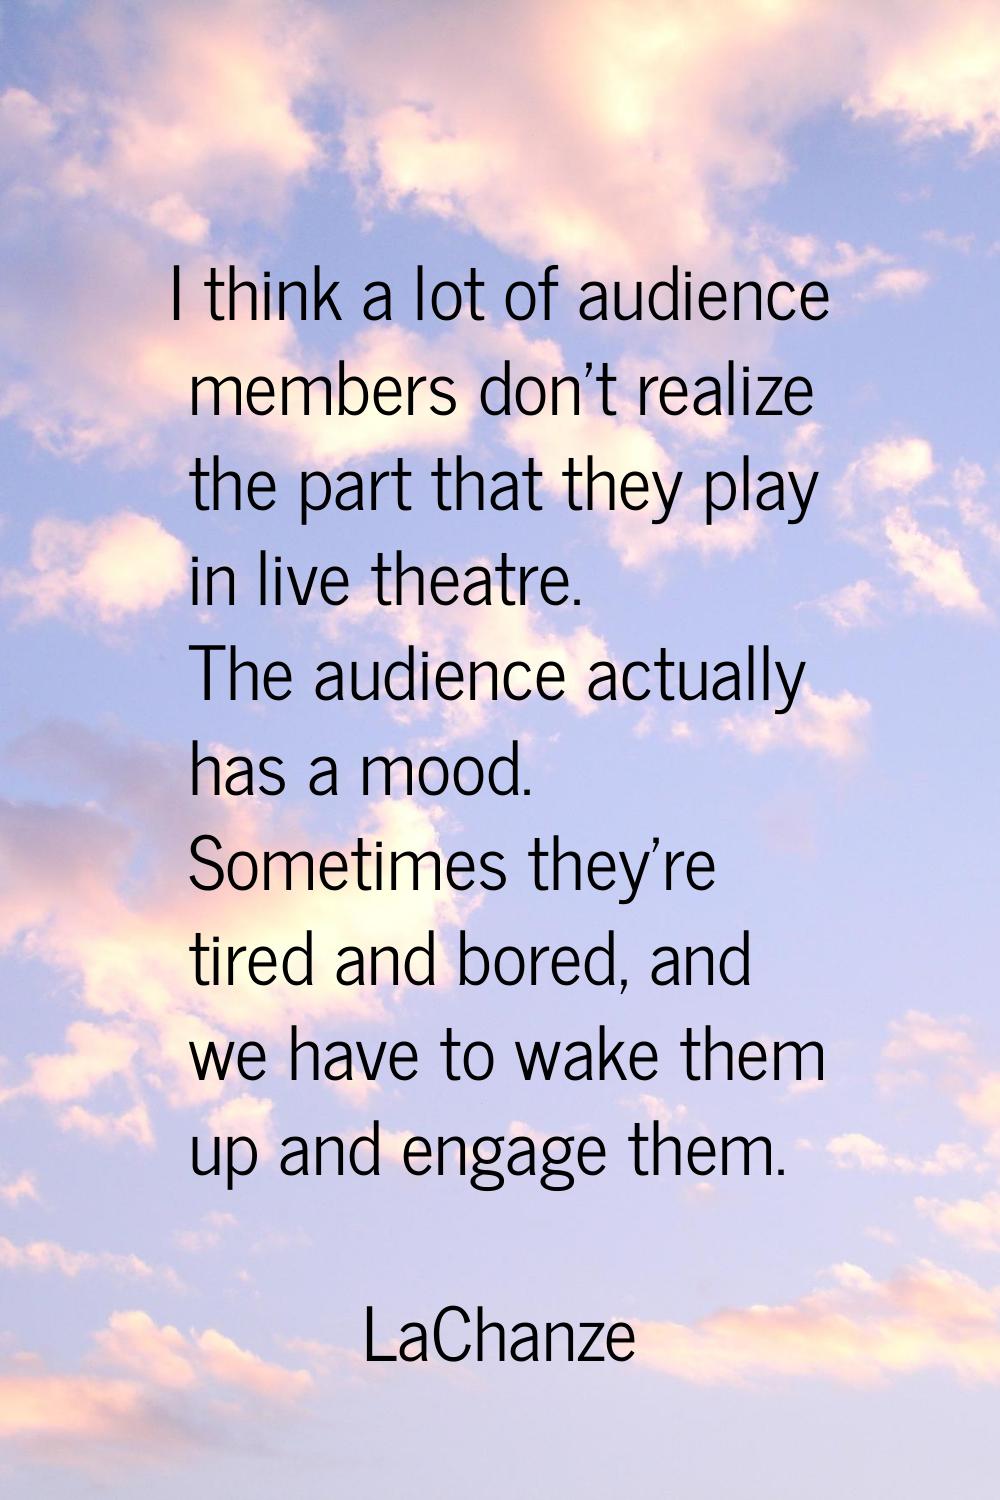 I think a lot of audience members don't realize the part that they play in live theatre. The audien